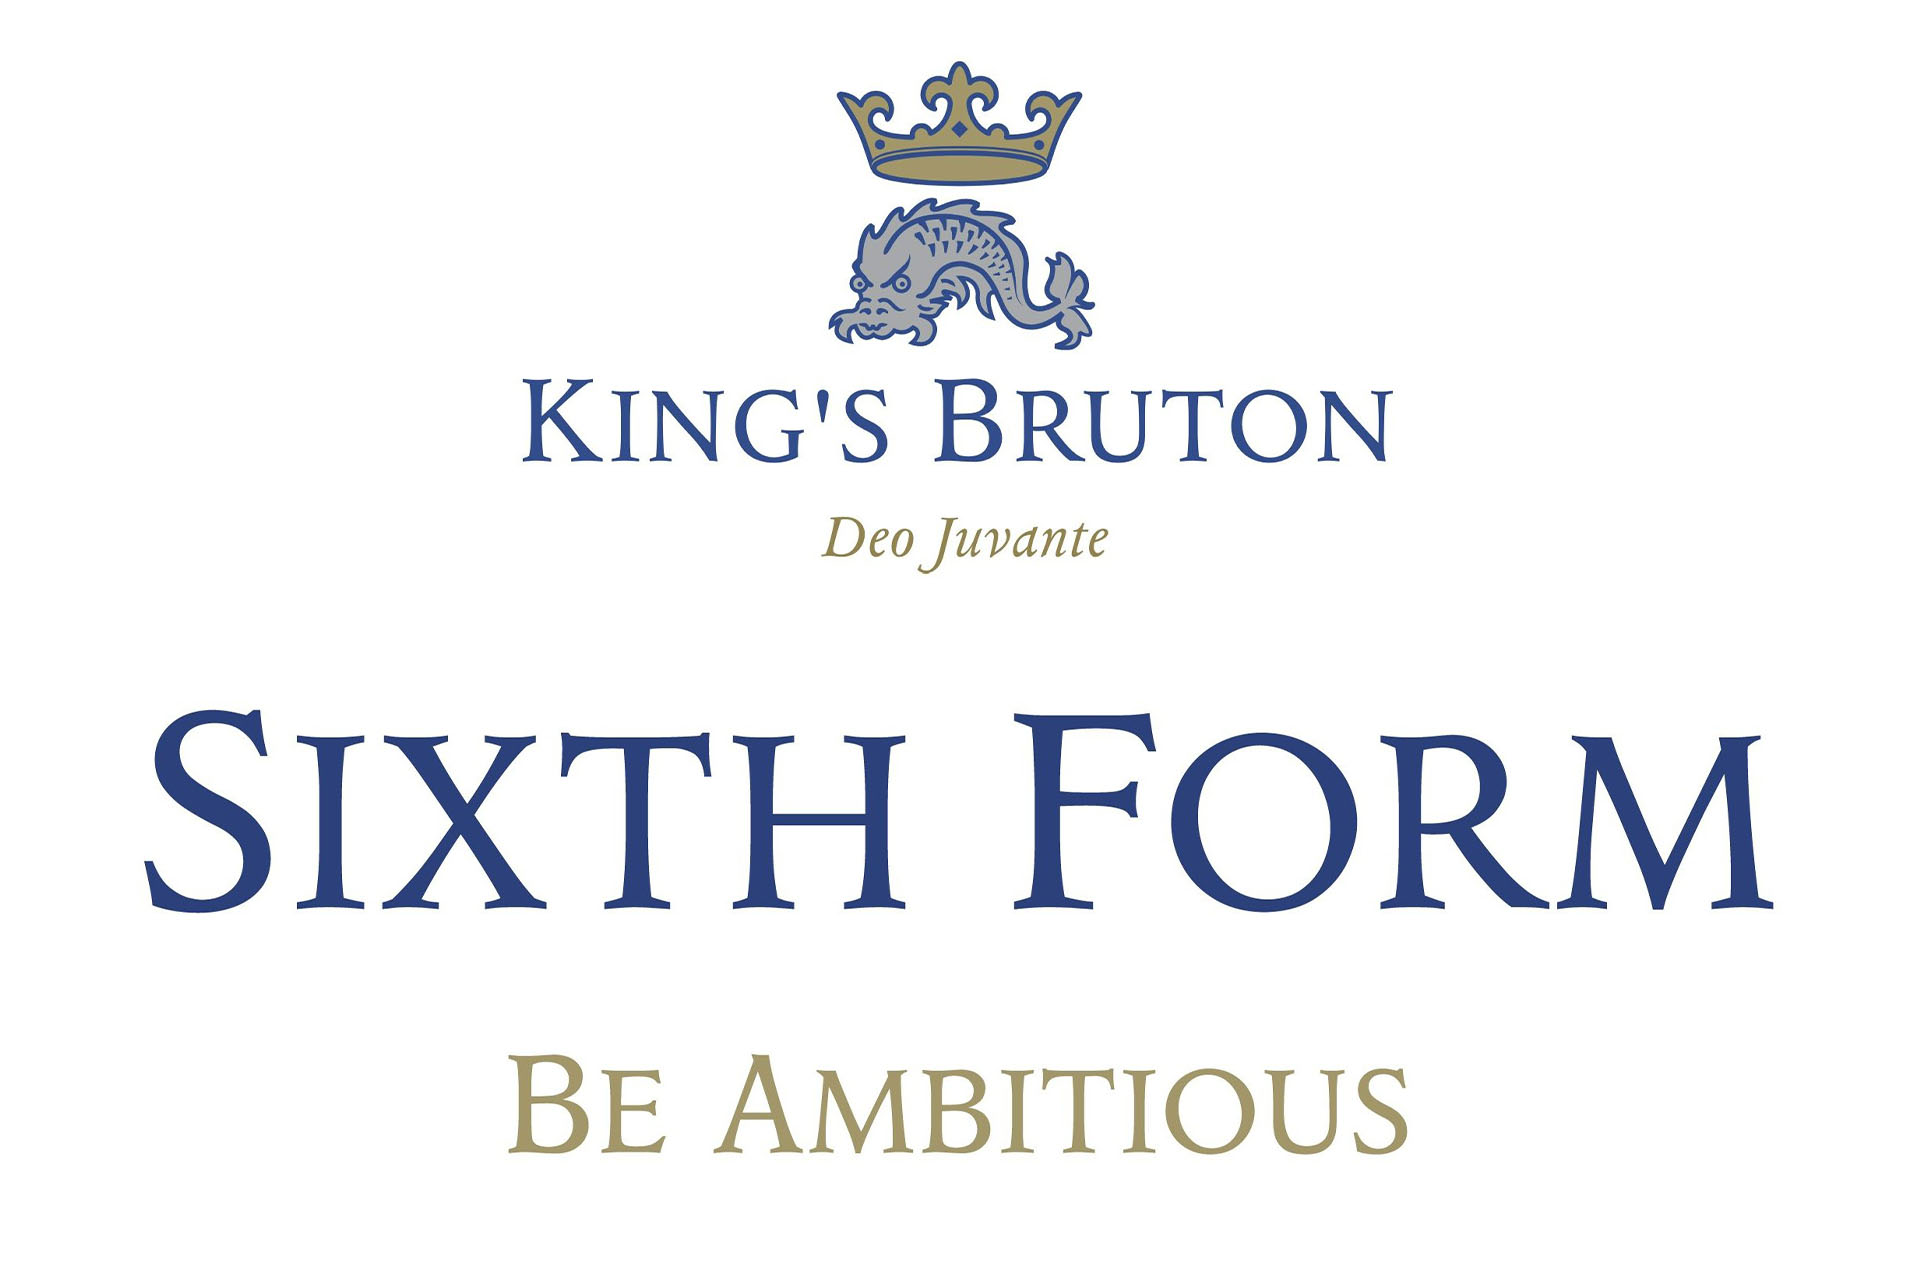 King's Bruton Introduction to Sixth Form